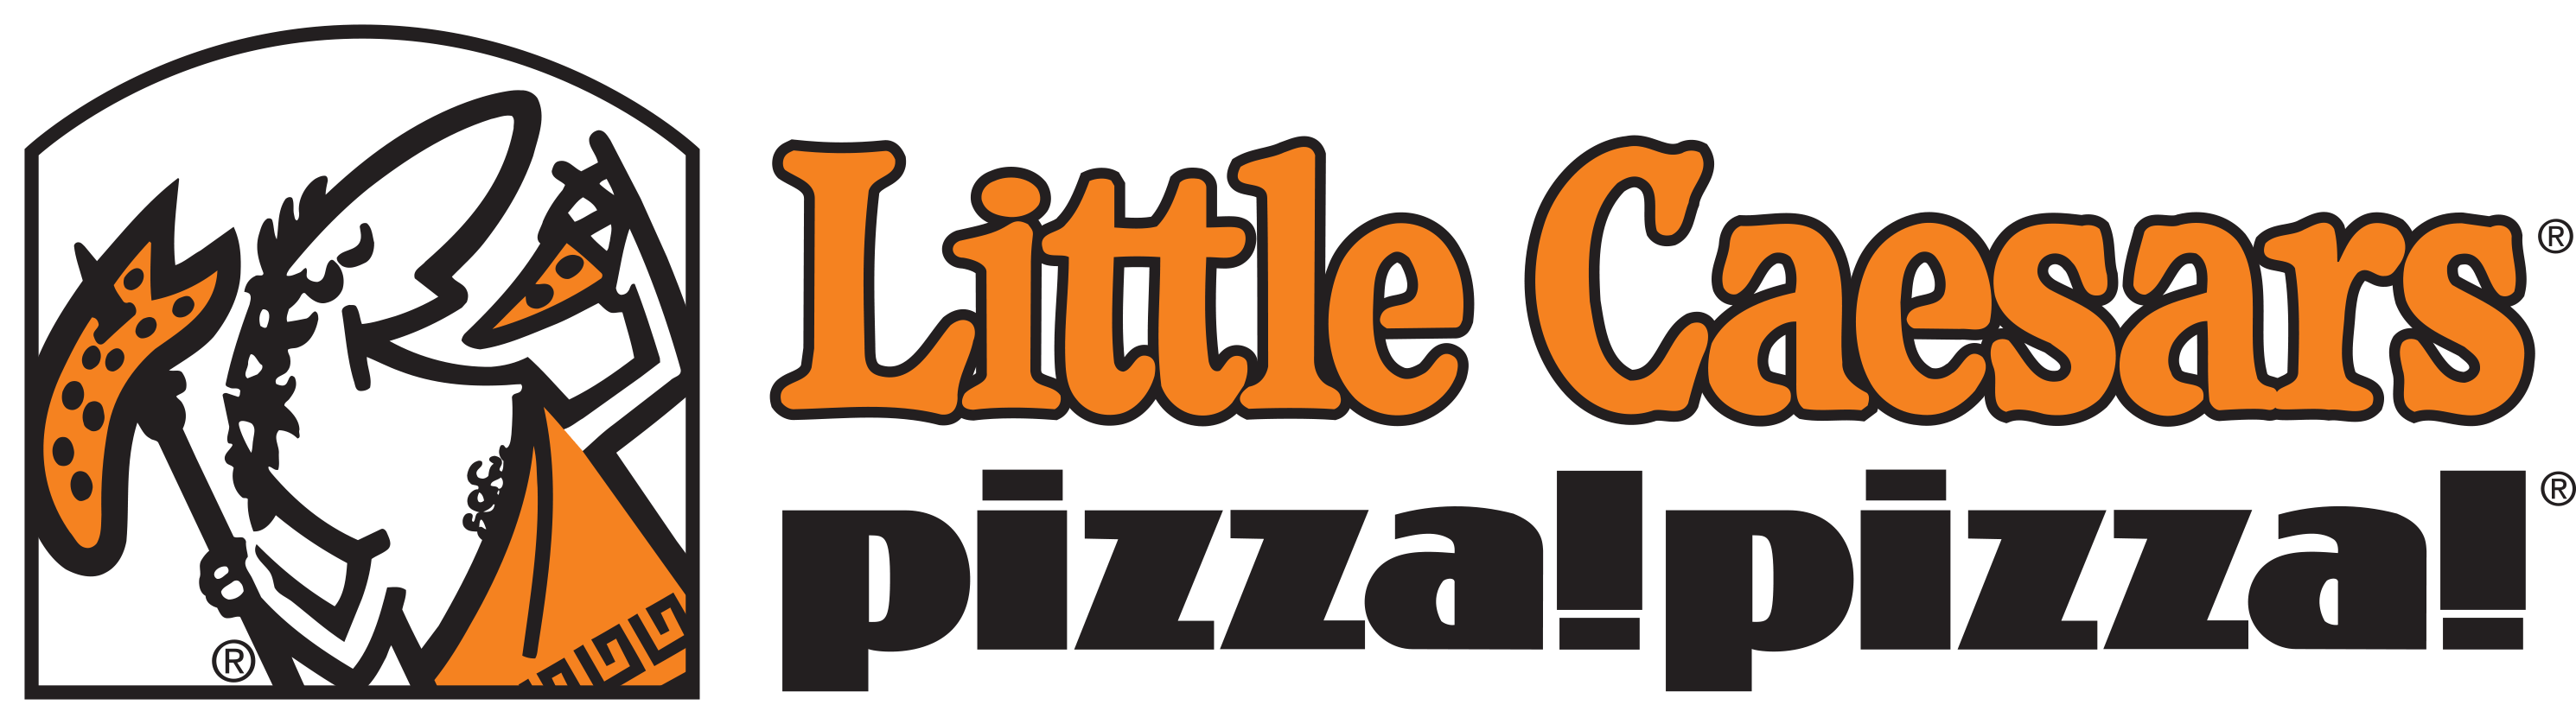 Little Ceasars Pizza Logo - Little Caesars. Pizza!. Pizza, Creative pizza and Shop